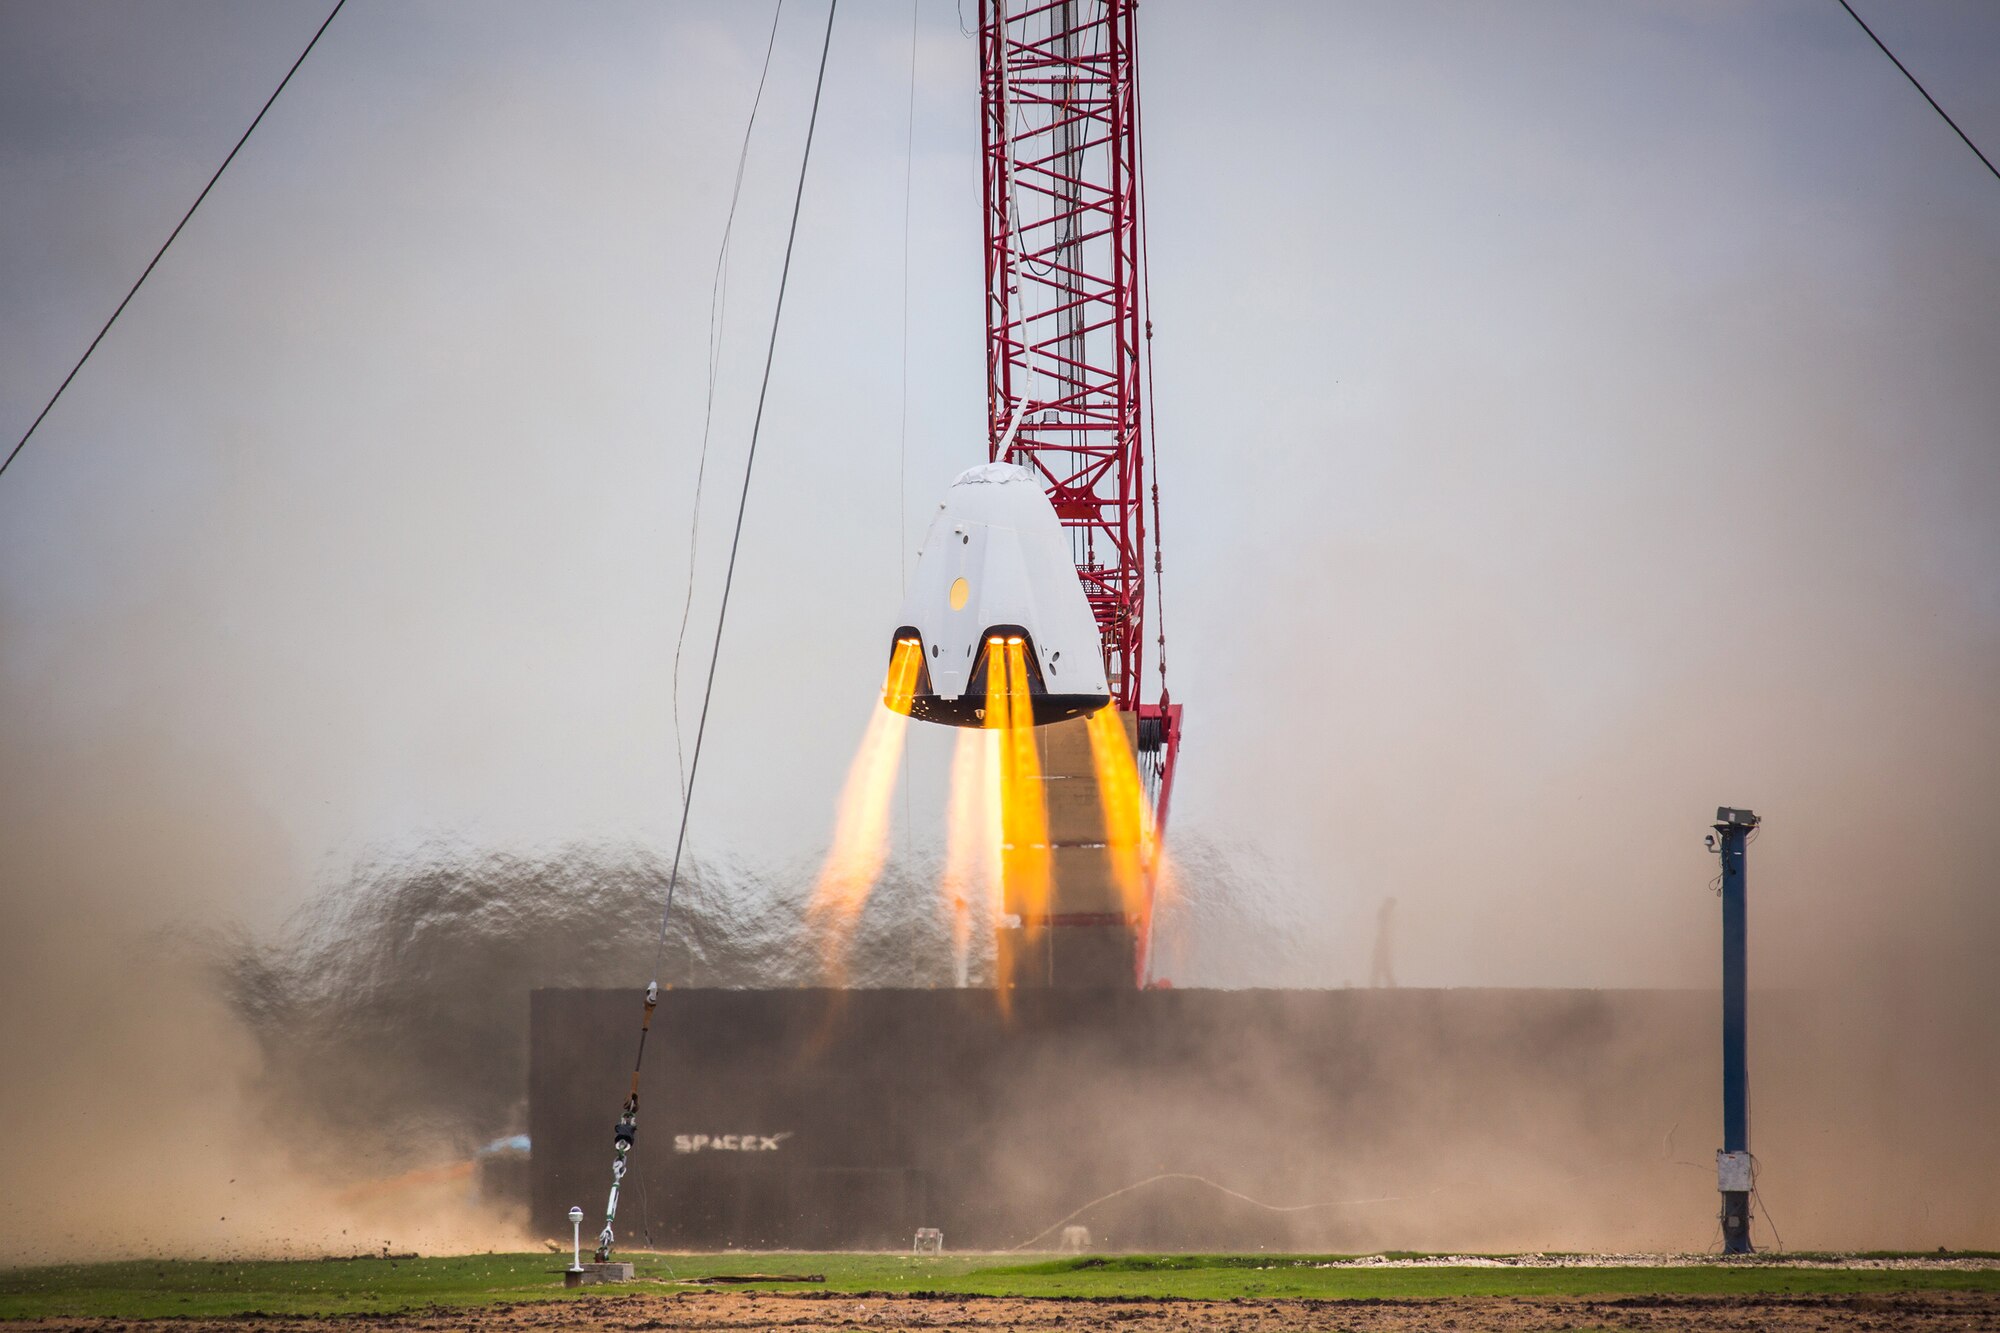 SpaceX performing a Propulsive Descent Landing with their Dragon capsule at the SpaceX Test Facility in McGregor, Texas